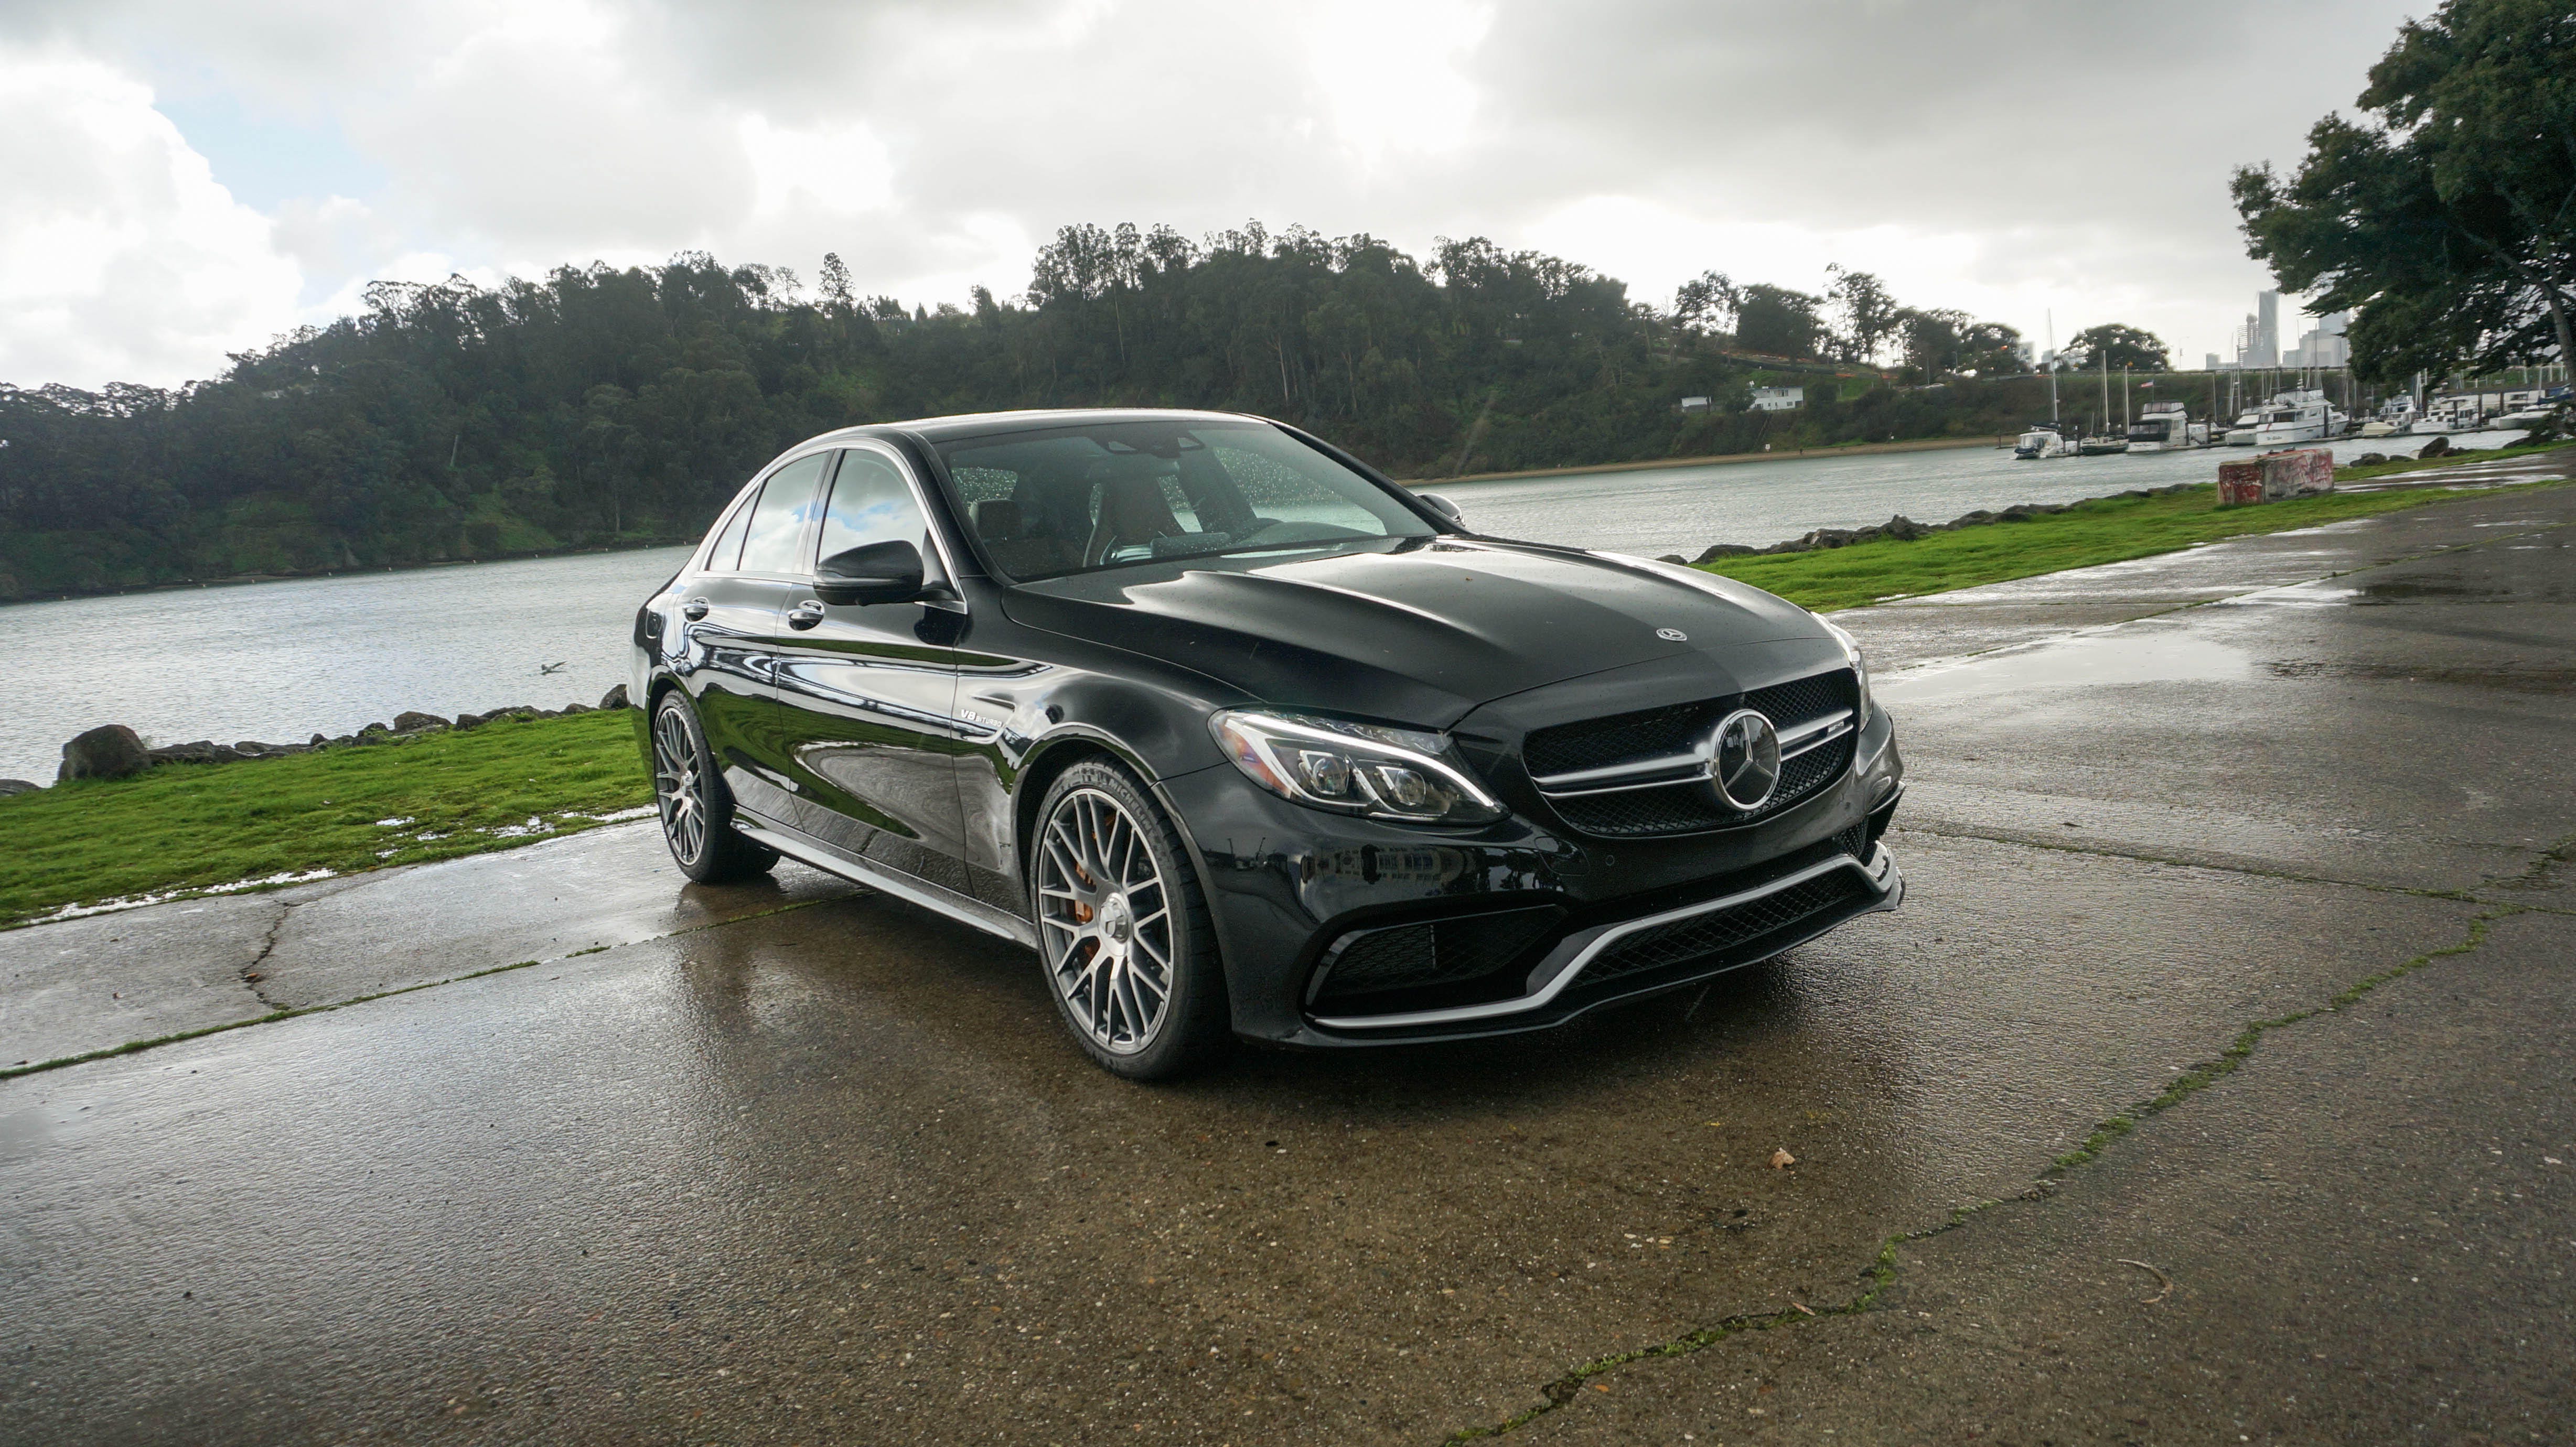 18 Mercedes Amg C63 S Review Ratings Specs Photos Price And More Roadshow